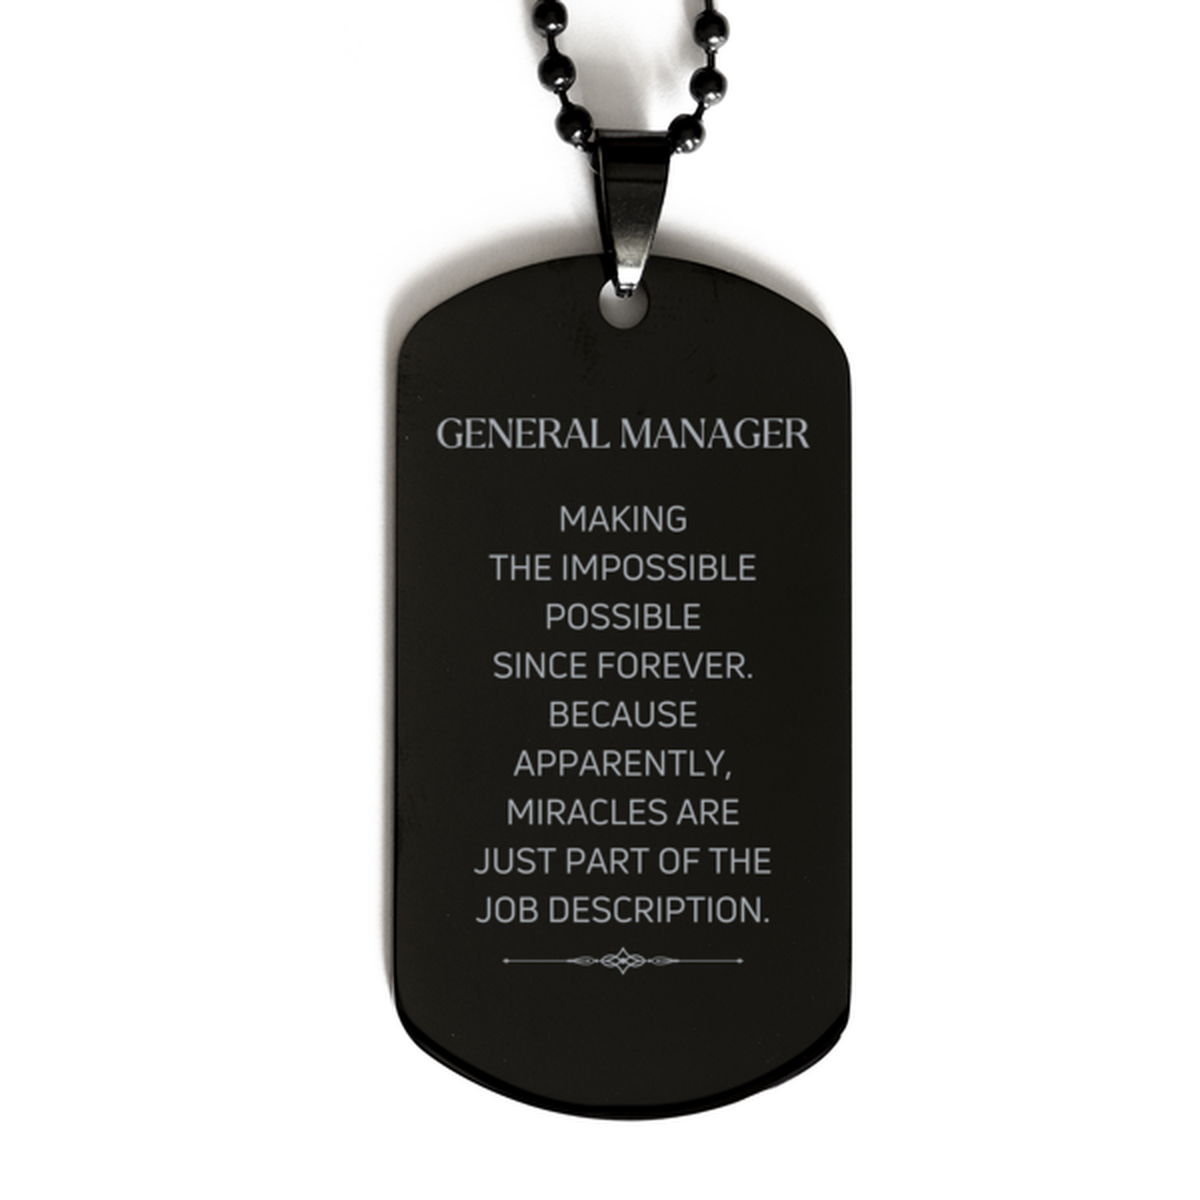 Funny General Manager Gifts, Miracles are just part of the job description, Inspirational Birthday Black Dog Tag For General Manager, Men, Women, Coworkers, Friends, Boss